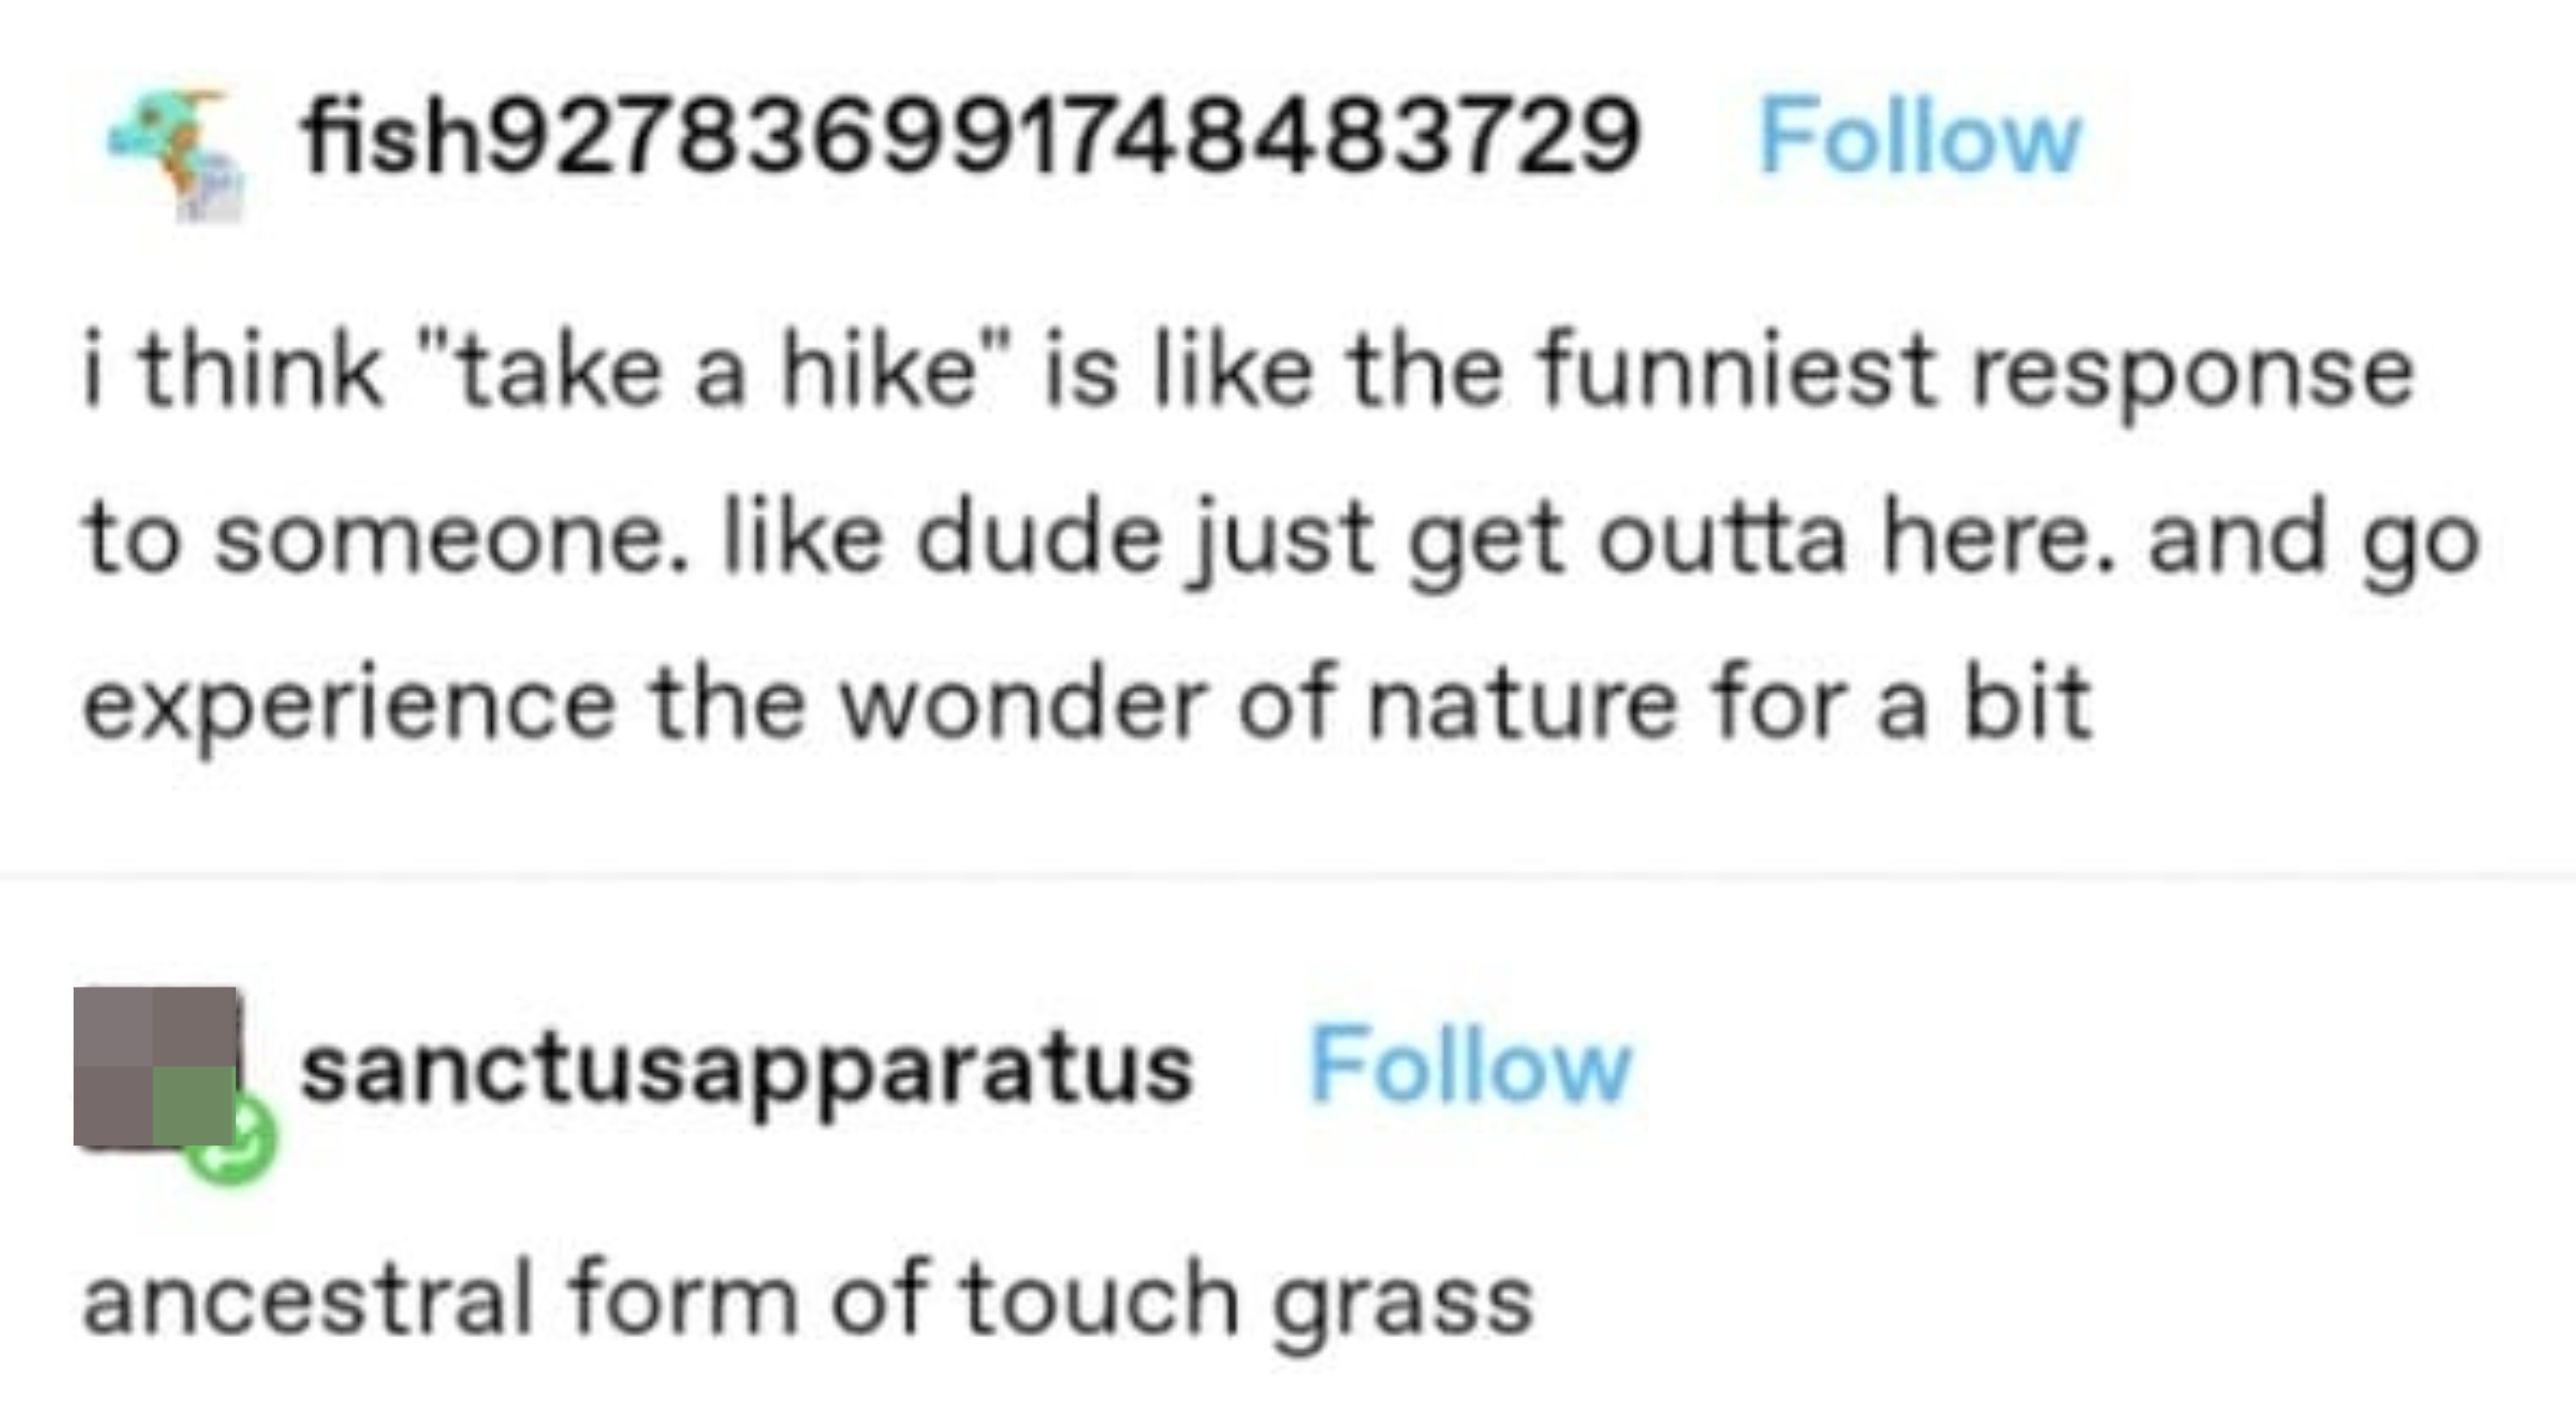 &quot;I think &#x27;take a hike&#x27; is like the funniest response to someone; like dude just get outta here and go experience the wonder of nature for a bit&quot; &quot;ancestral form of touch grass&quot;